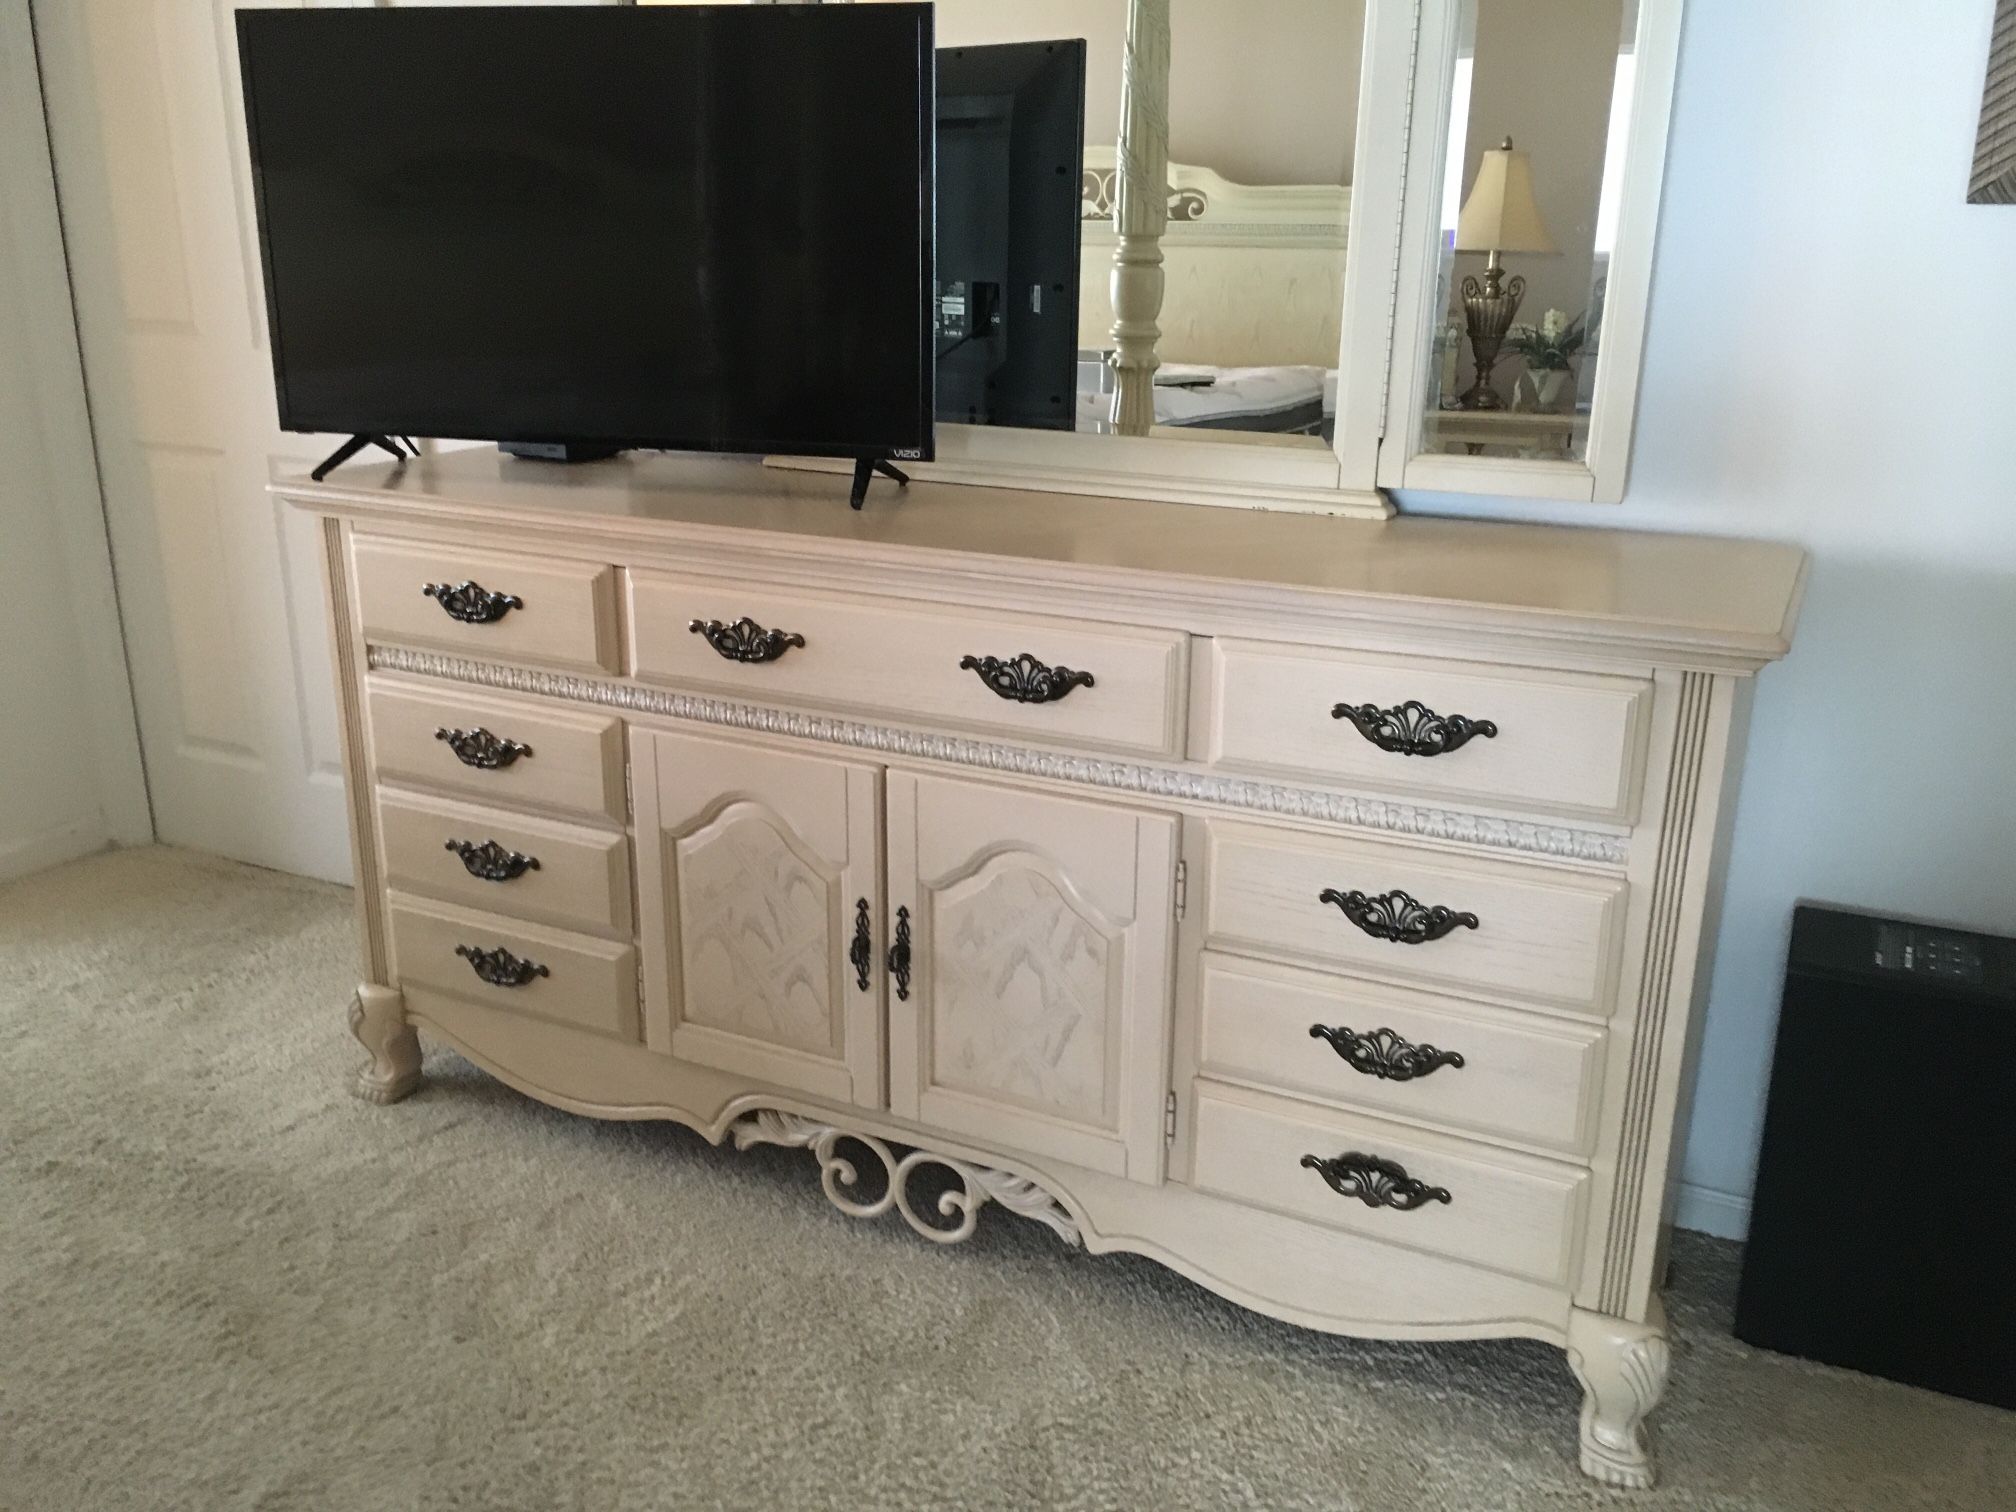 King Solid Wood Complete Bedroom Set -Reduced To Sell By Thanksgiving